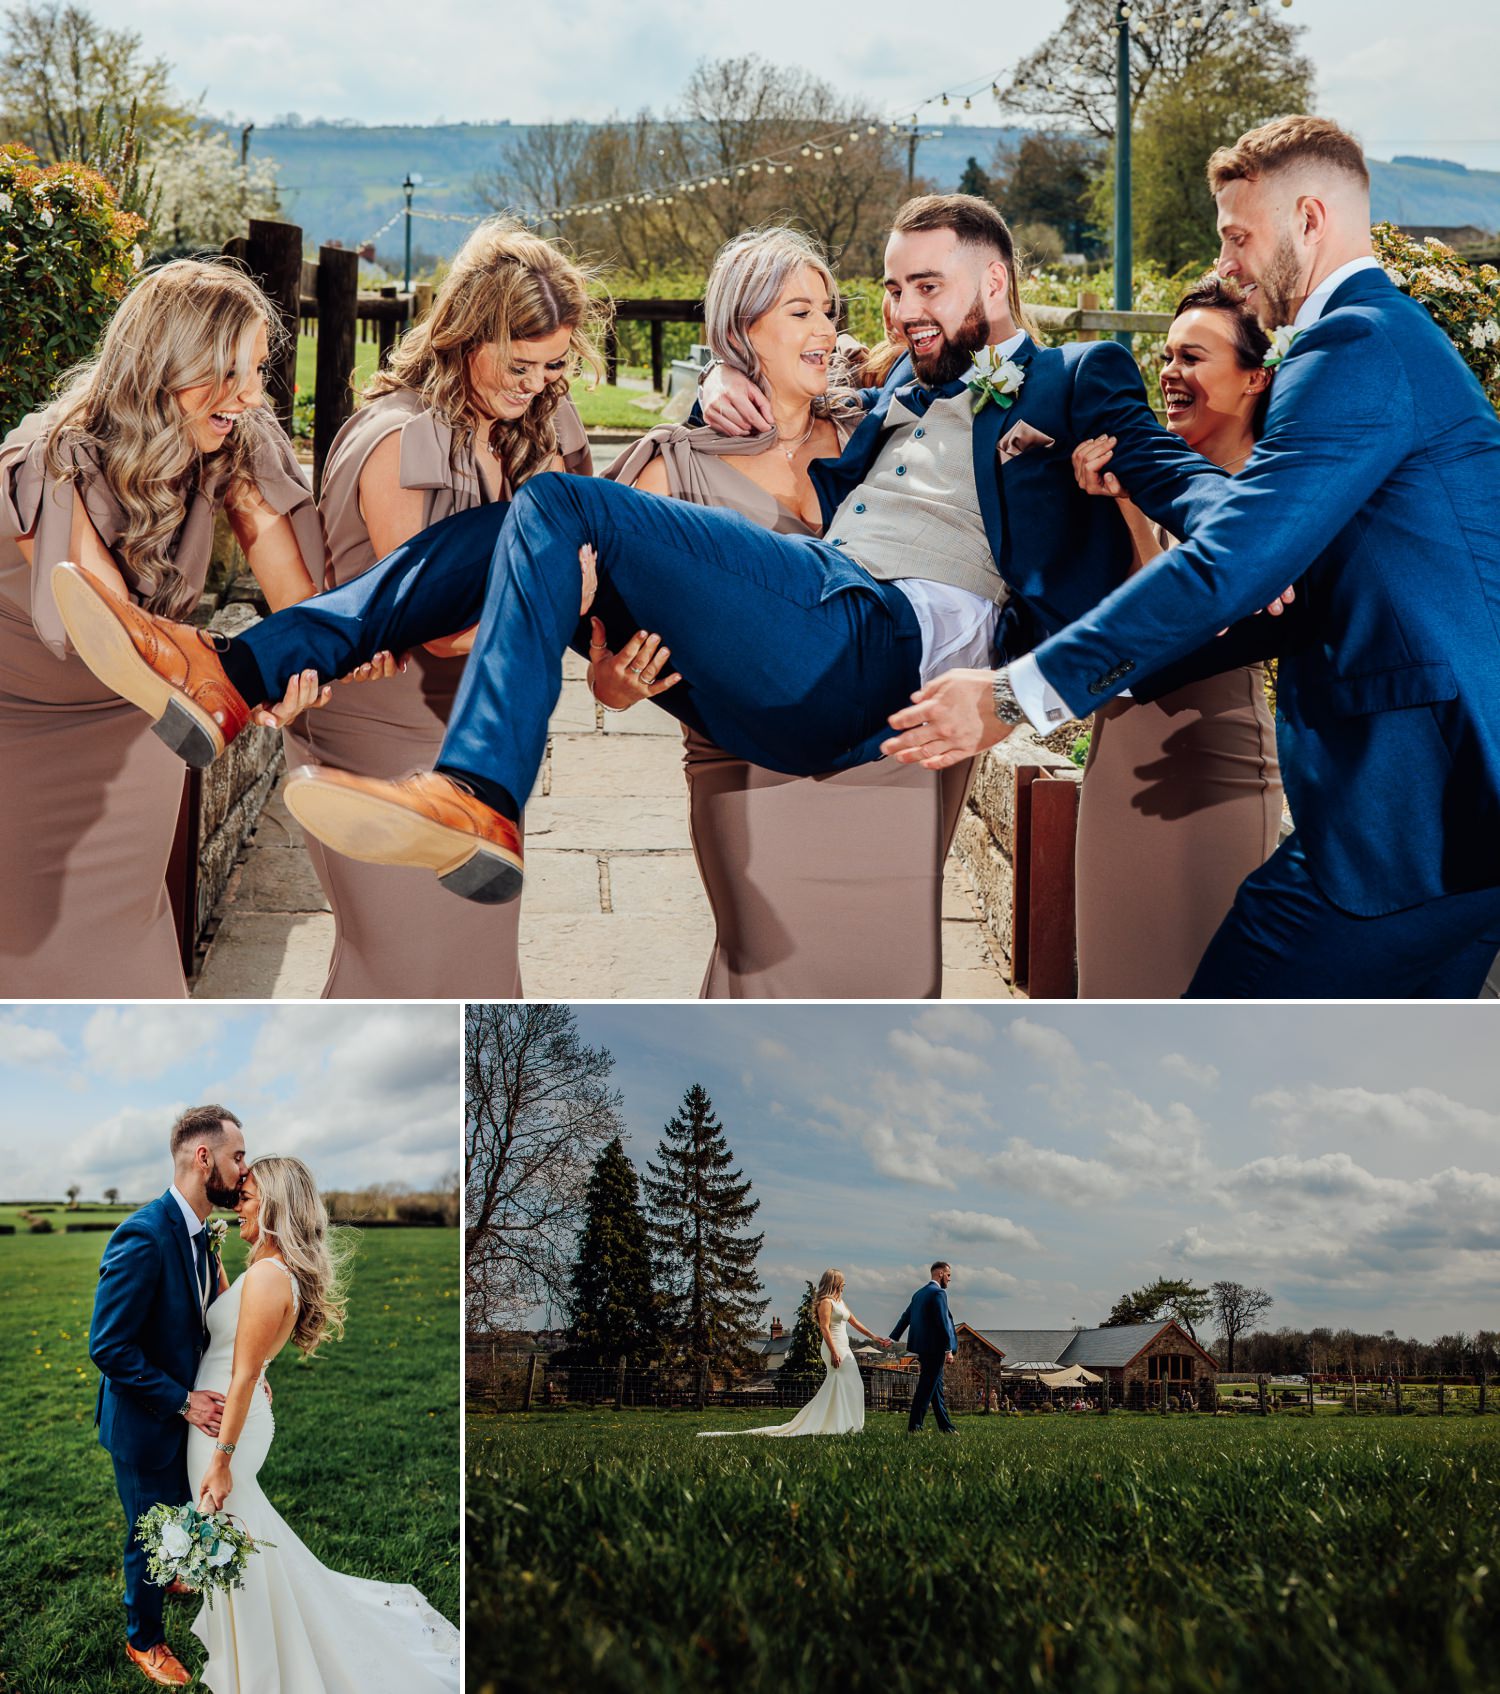 Groom being lifted by bridesmaids